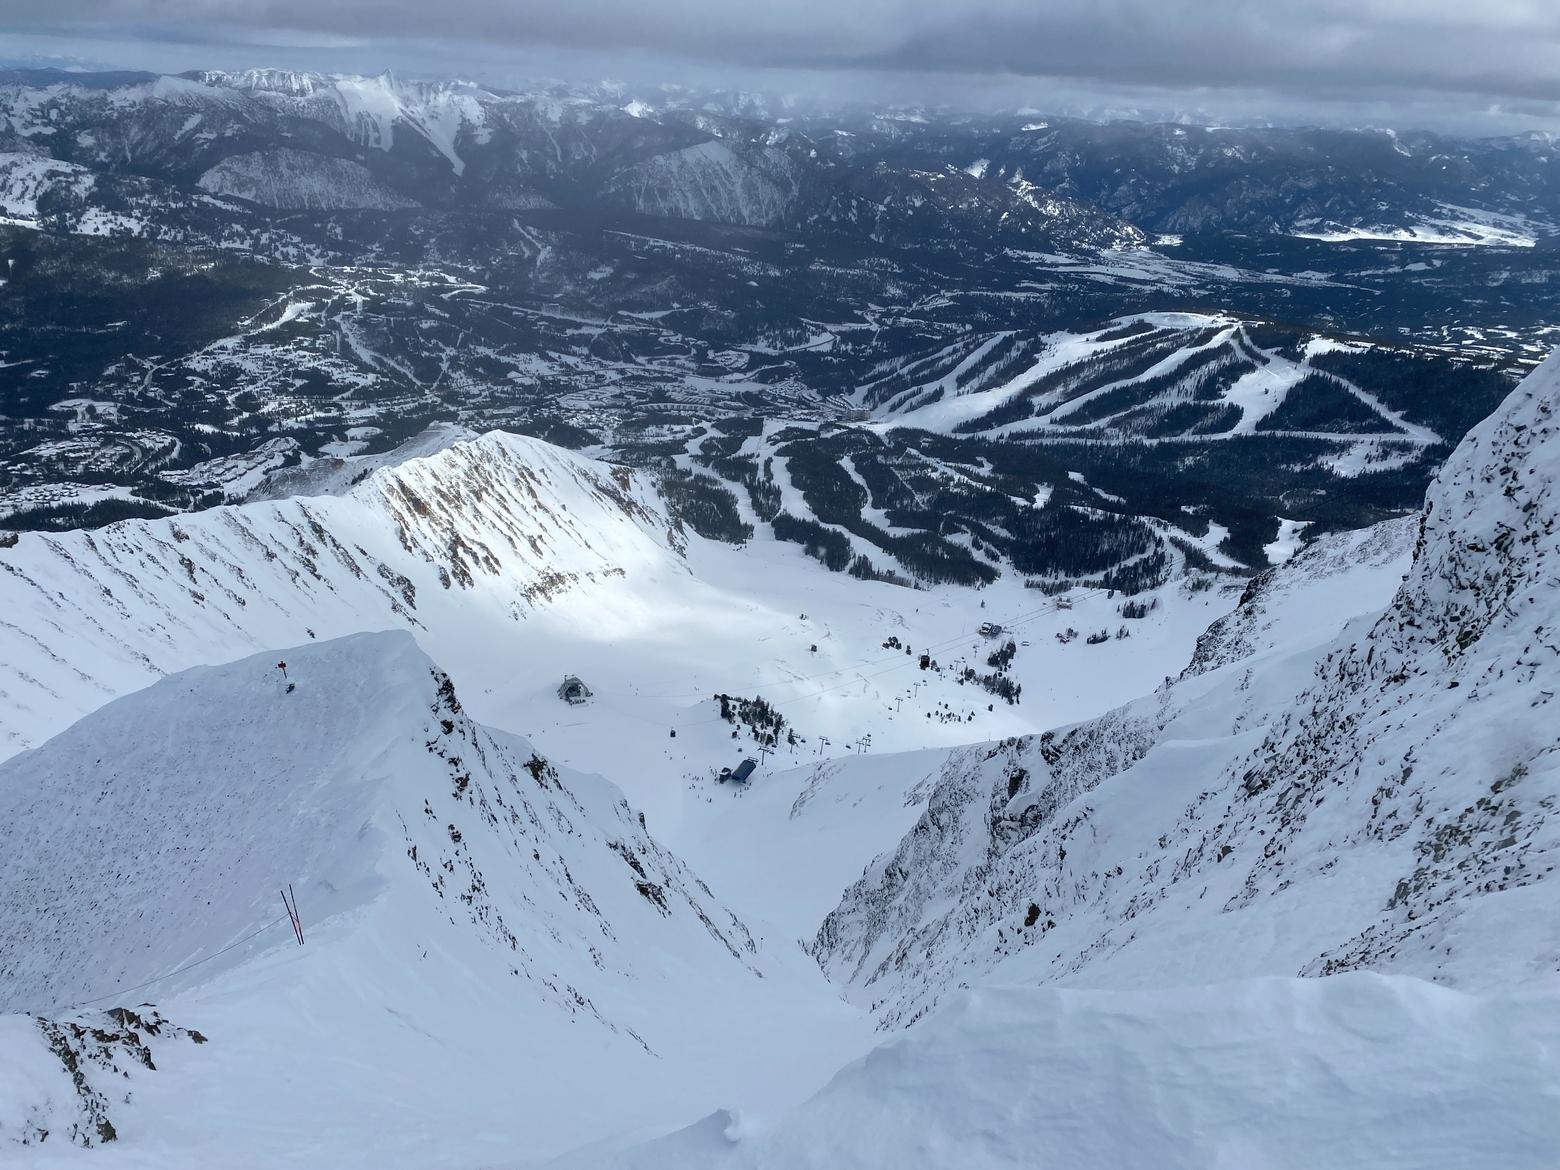 Looking northeast from the top of Lone Mountain at Big Sky Resort with the Big Couloir and the tram dock below. Photo by Joseph T. O'Connor